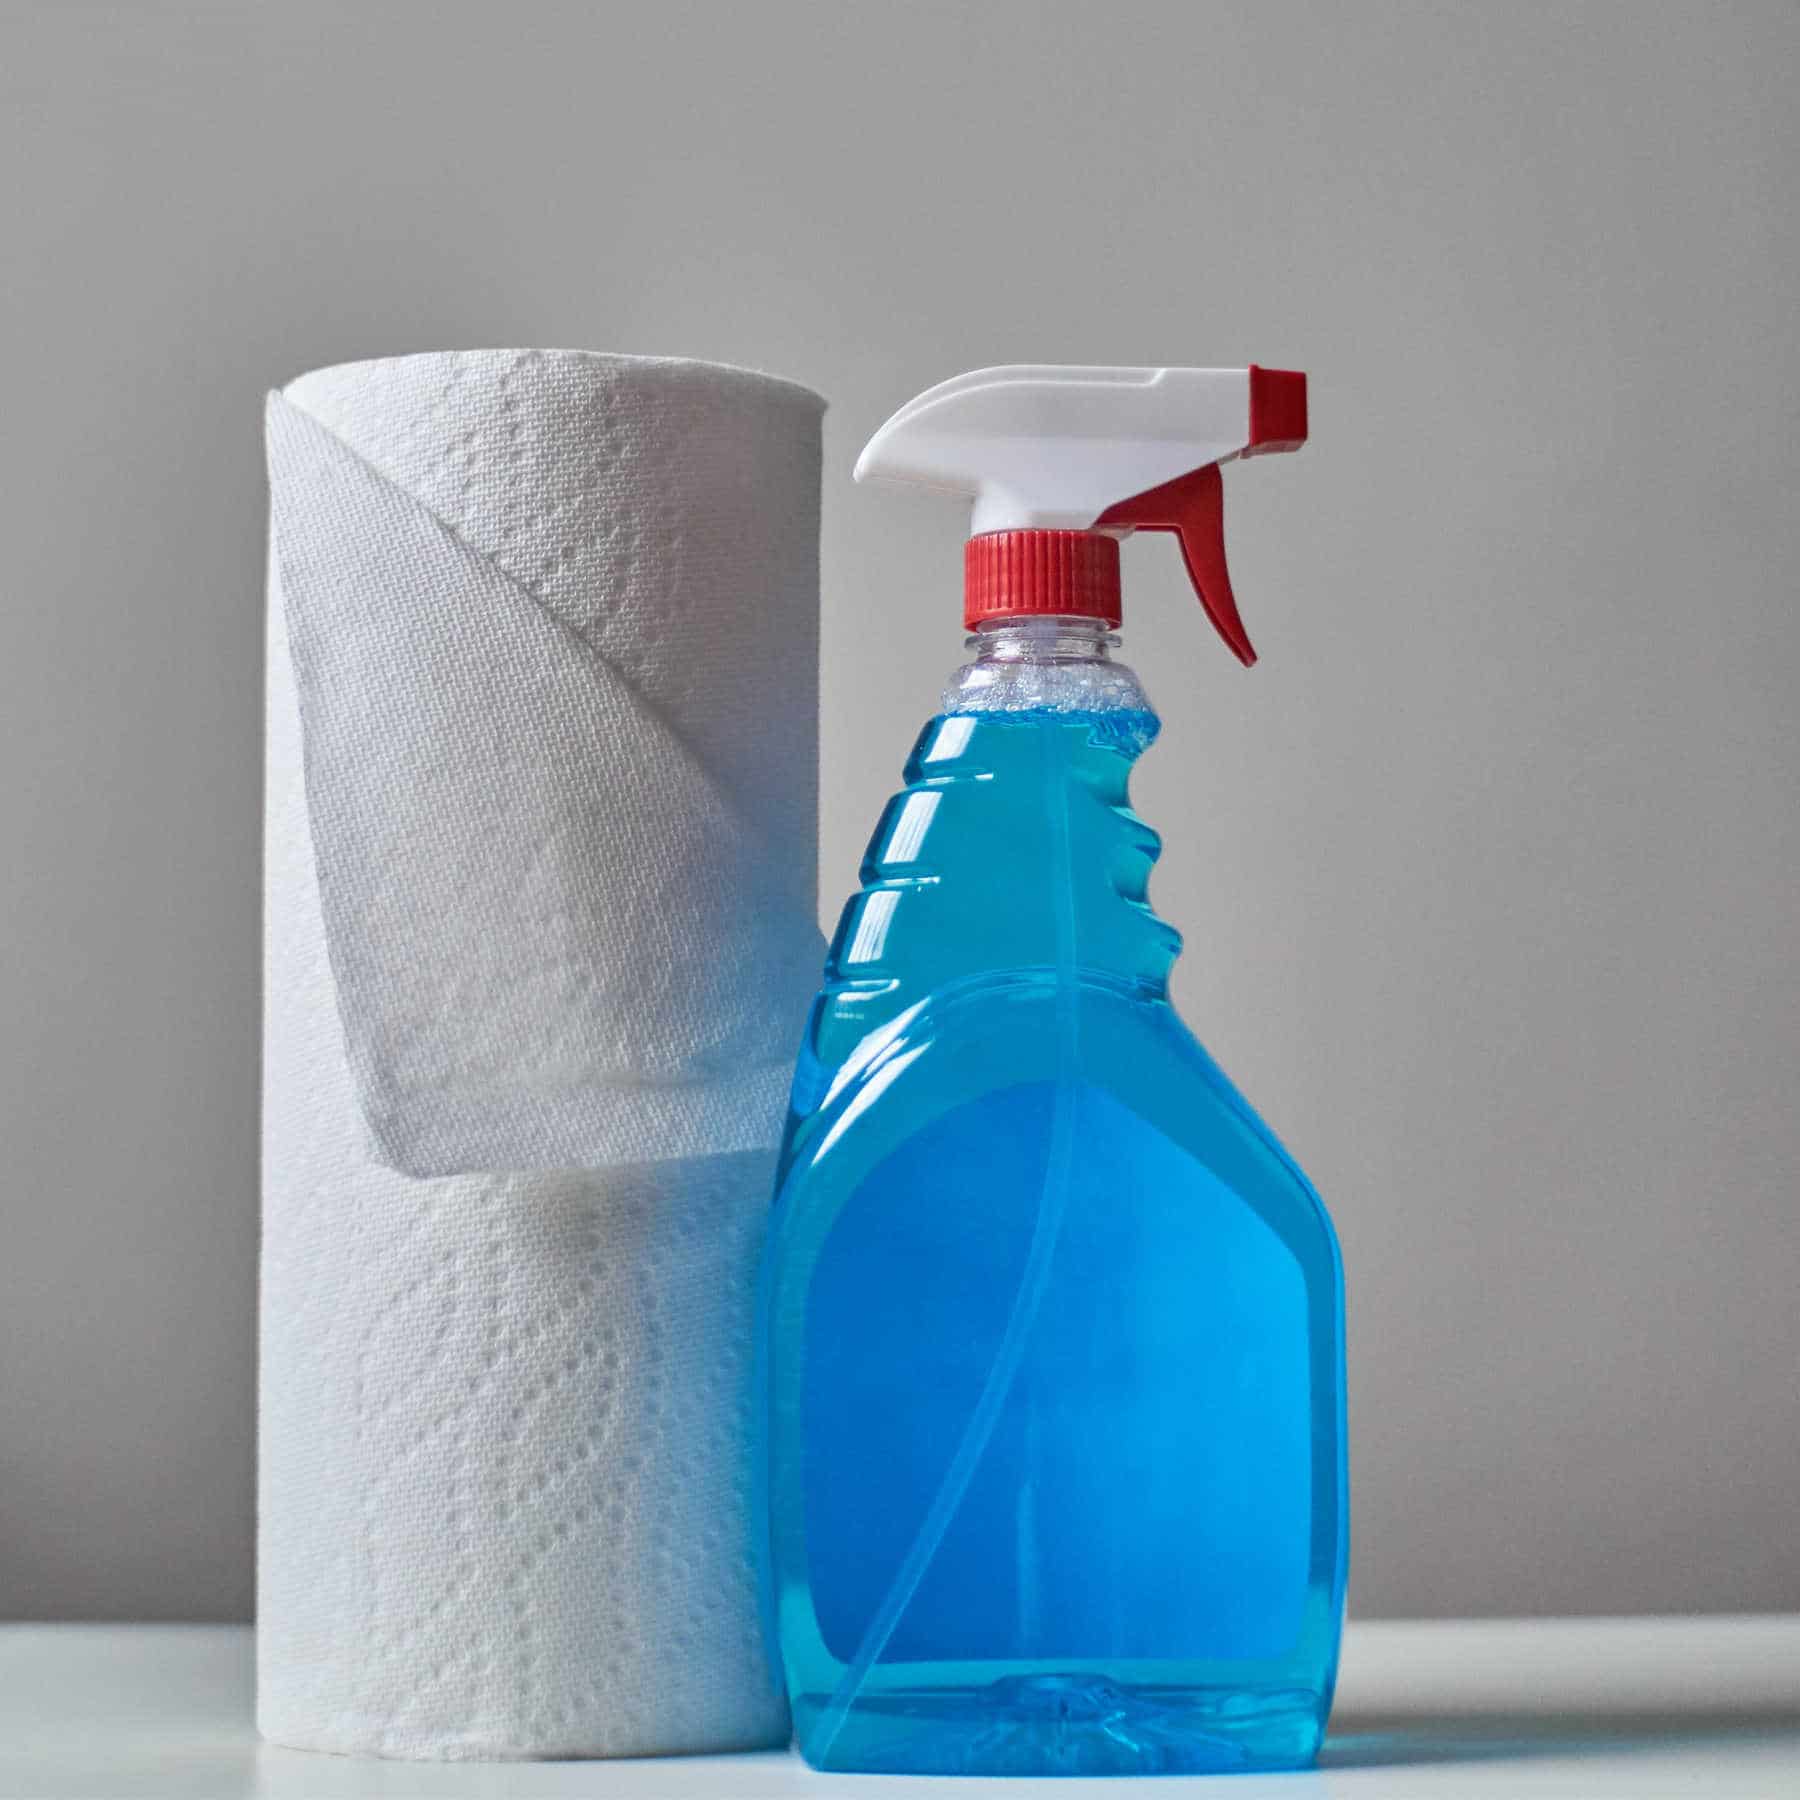 Windex Glass Cleaners Class Action Settlement